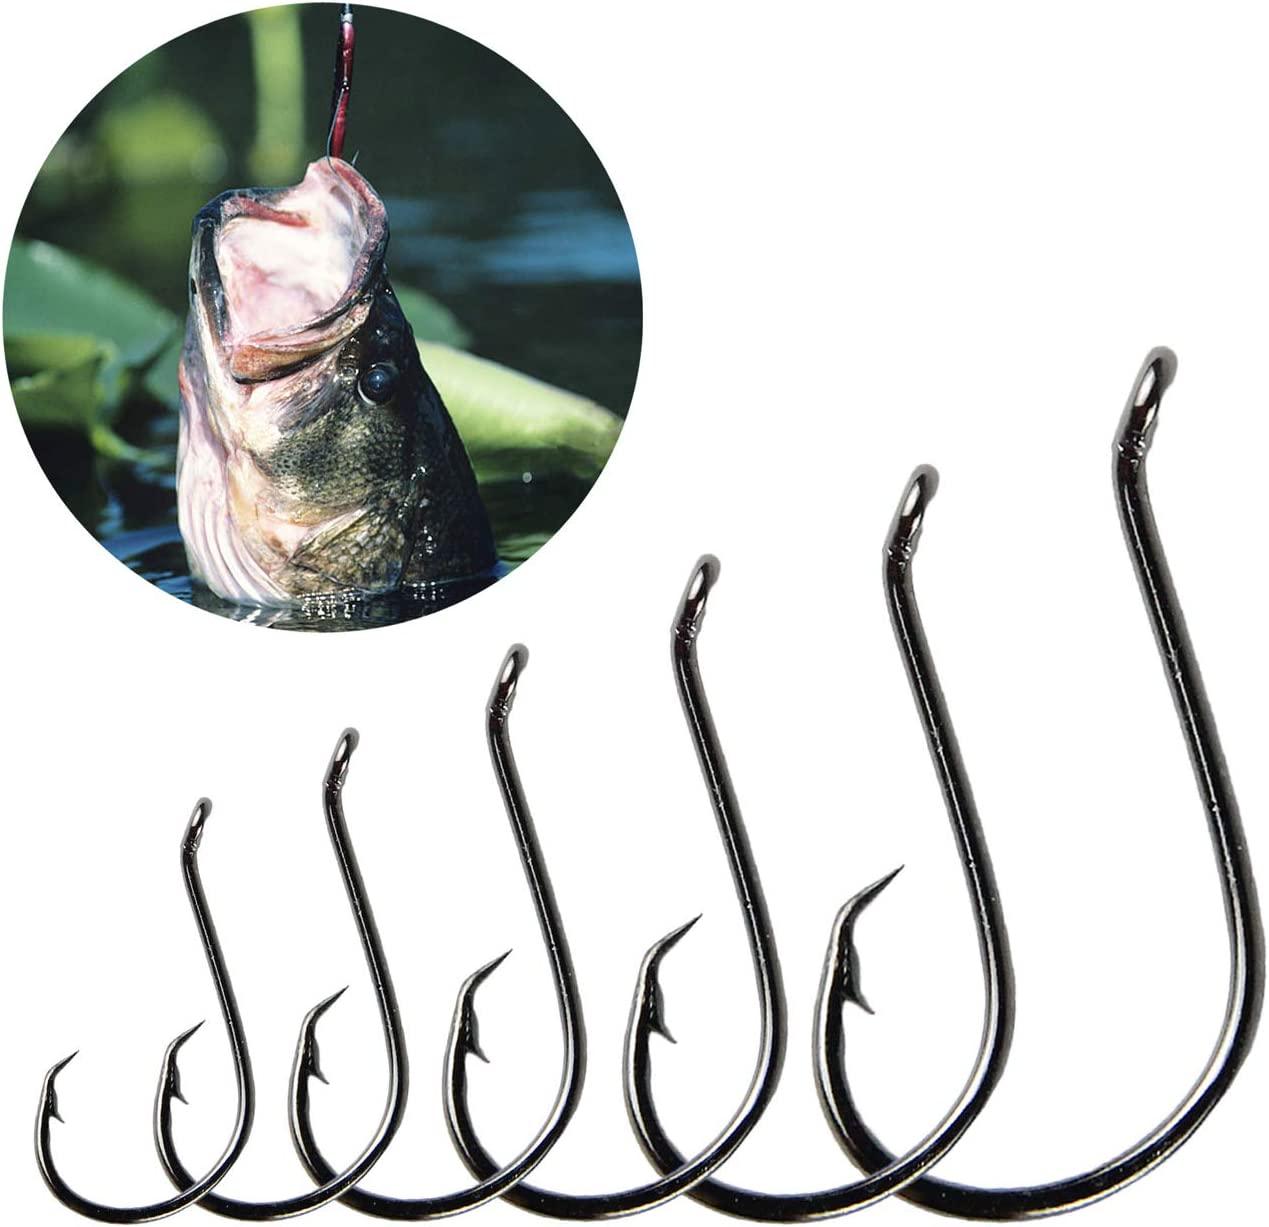 PATIKIL 10 Sizes Claw Fish Hooks, 100 Pack High Carbon Steel Circle Hook  Catfish Hook J Shape with Barbs for Freshwater Saltwater, Black, Hooks -   Canada